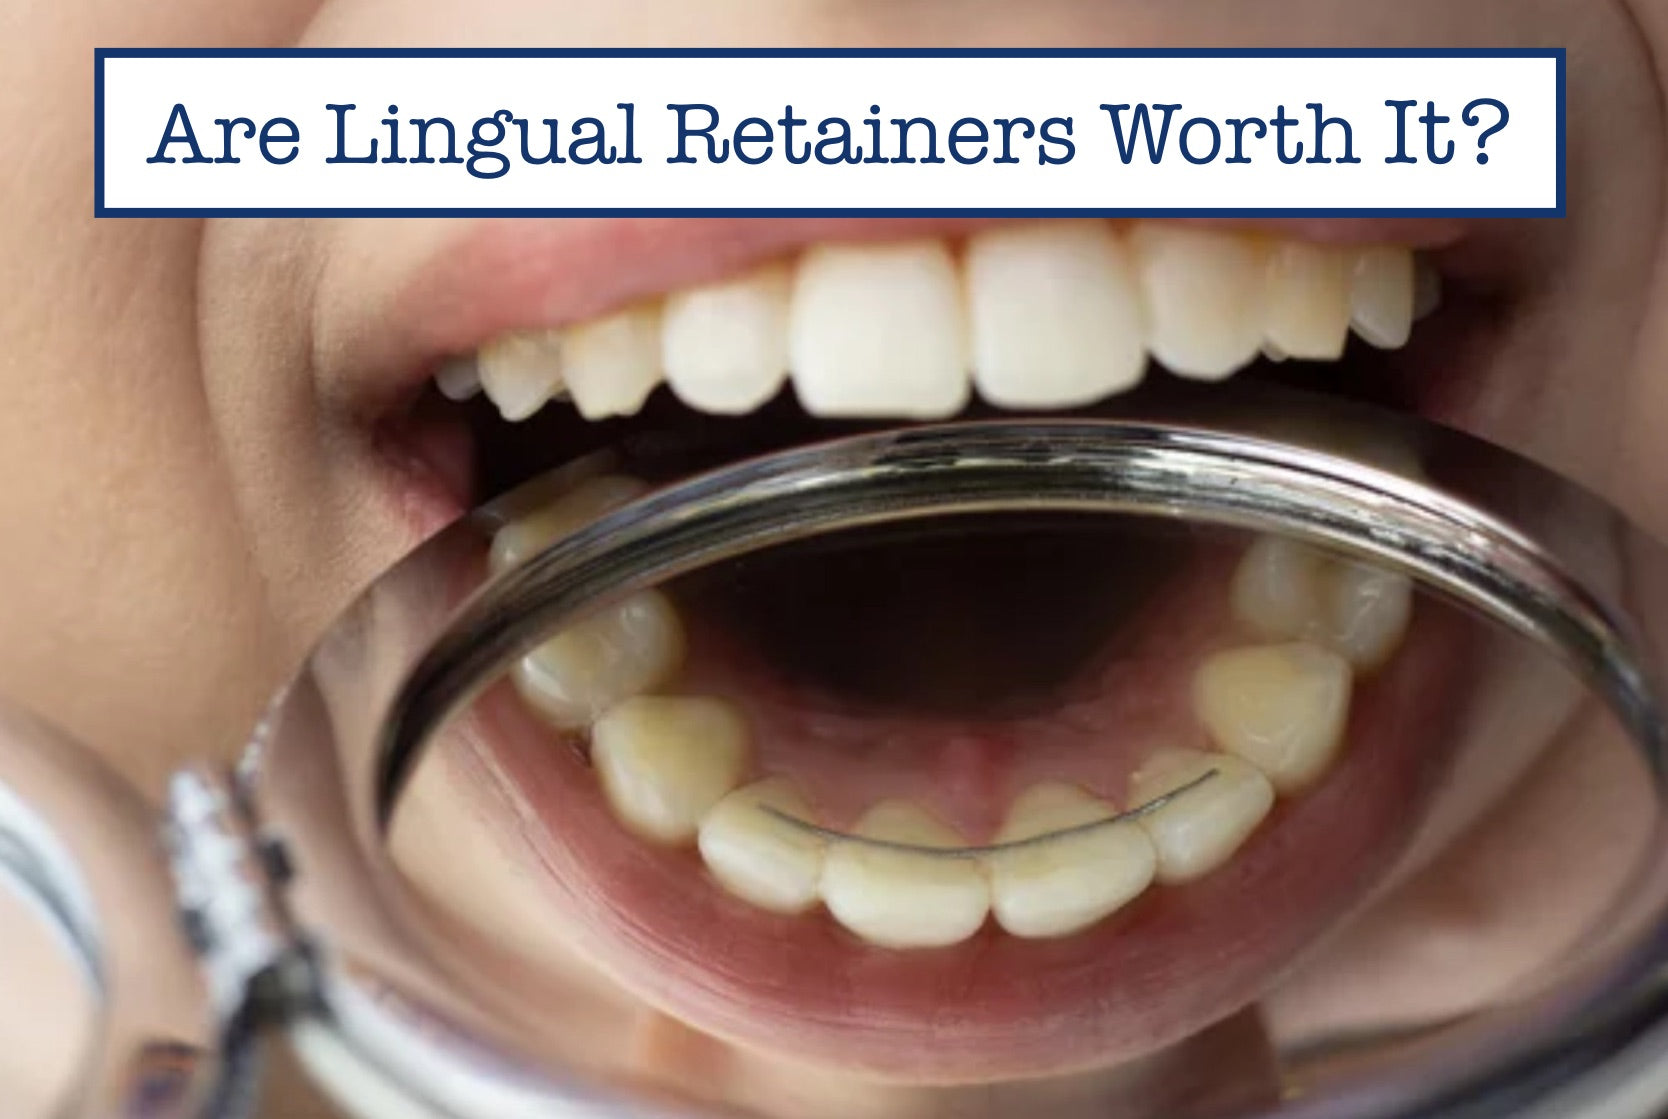 Are Lingual Retainers Worth It?